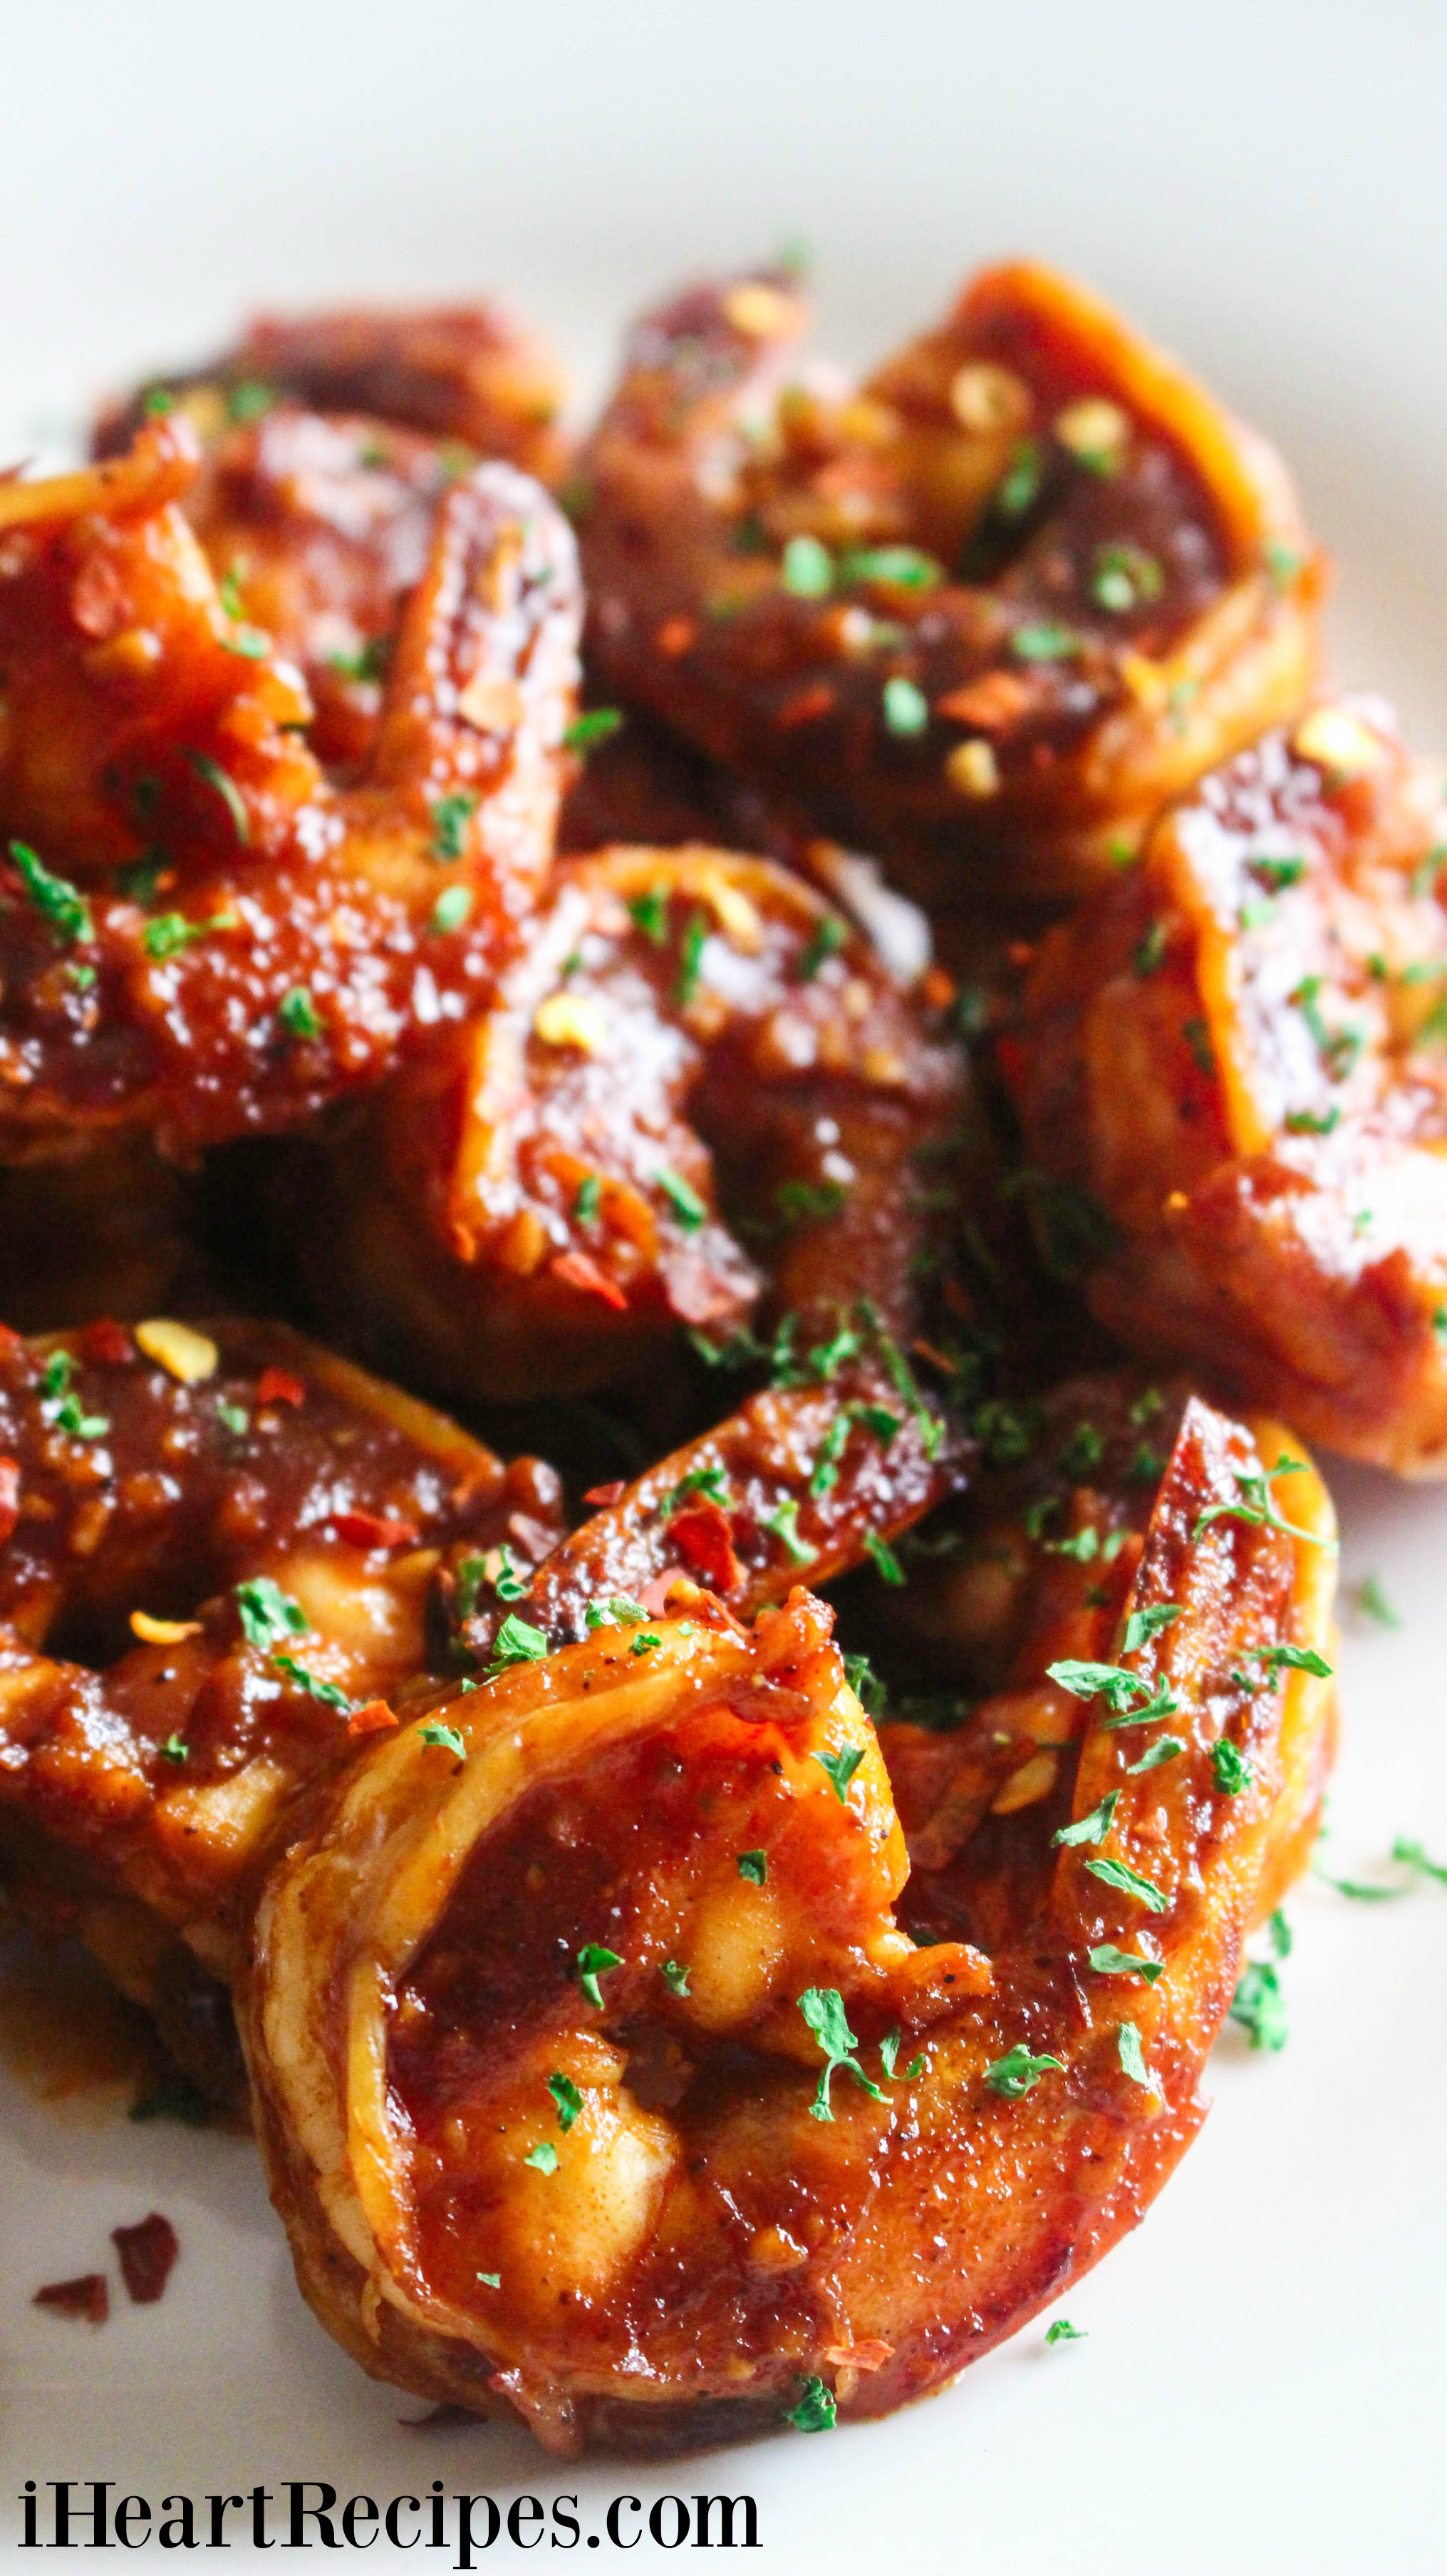 Spicy Baked Bbq Shrimp I Heart Recipes,Healthy Chicken Drumstick Recipes